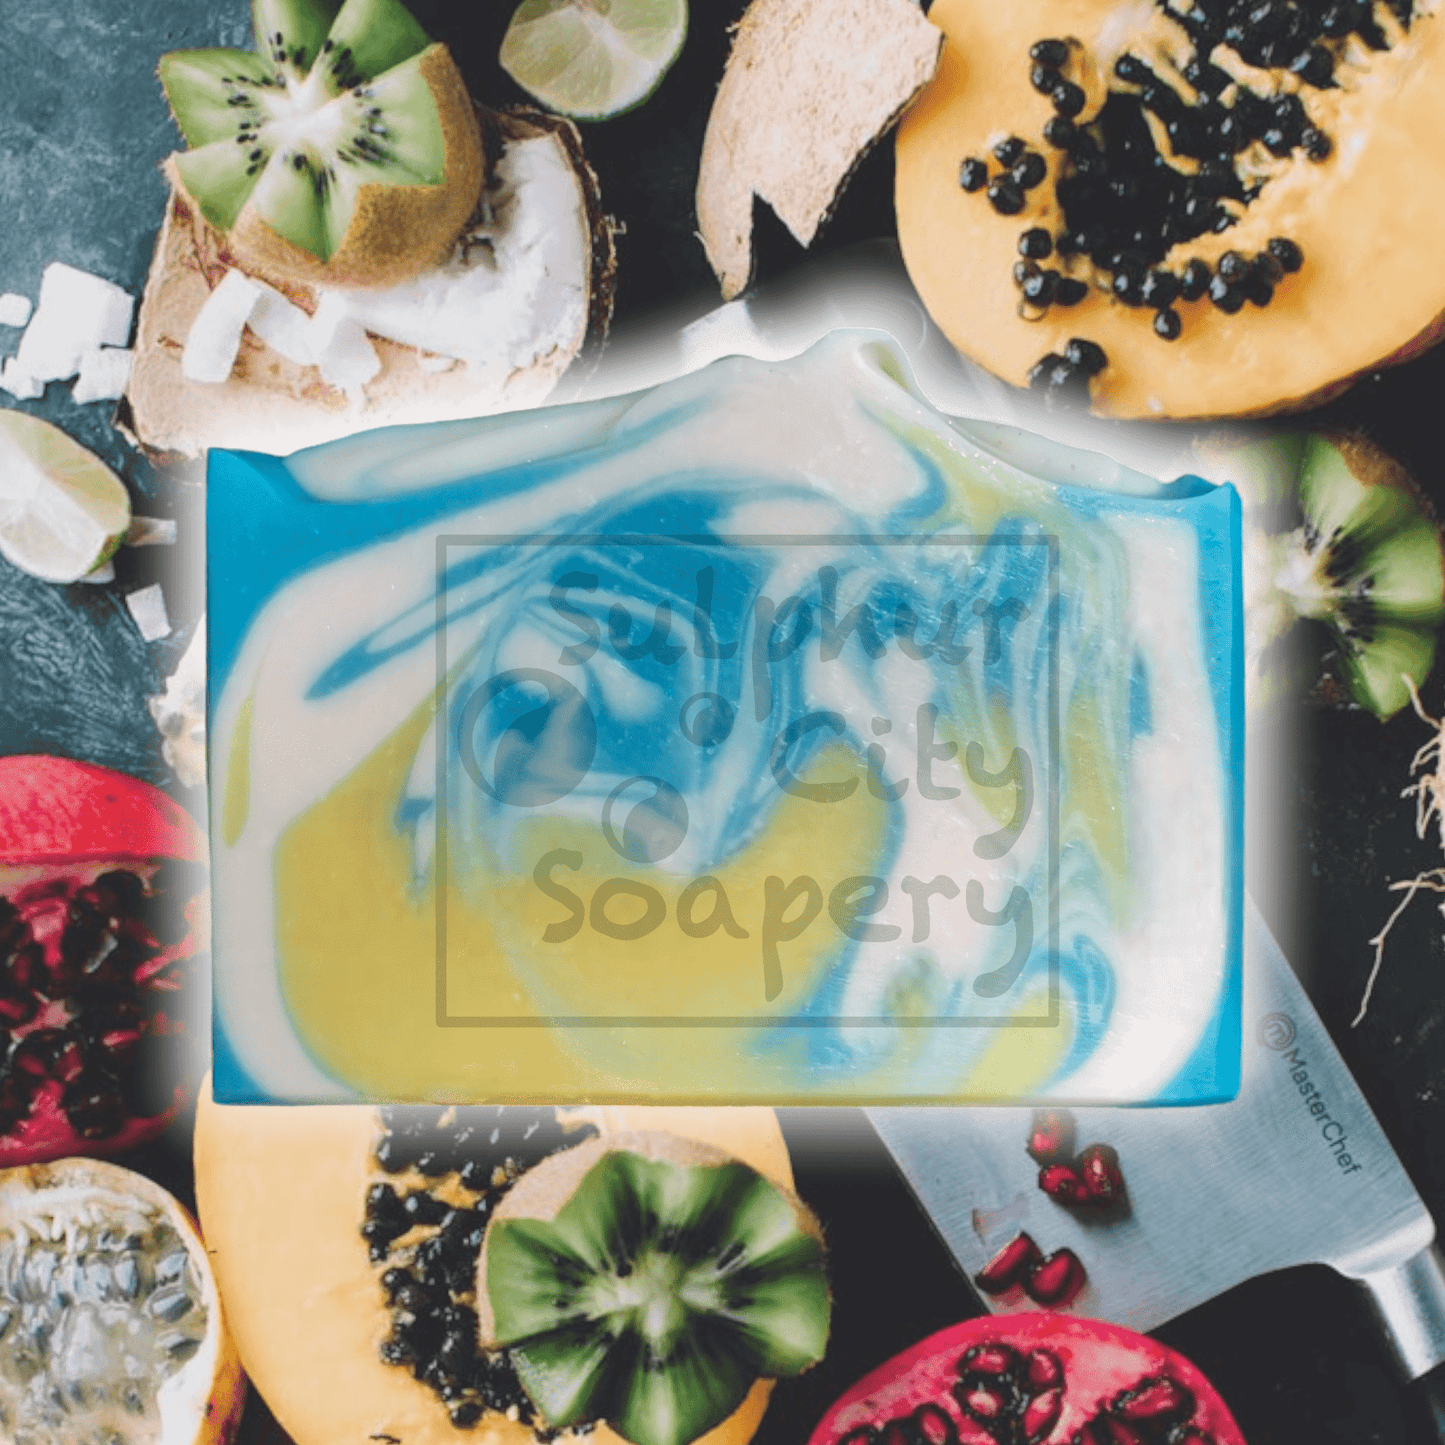 Sulphur City Soapery soap Tropical Fruits scented soap.